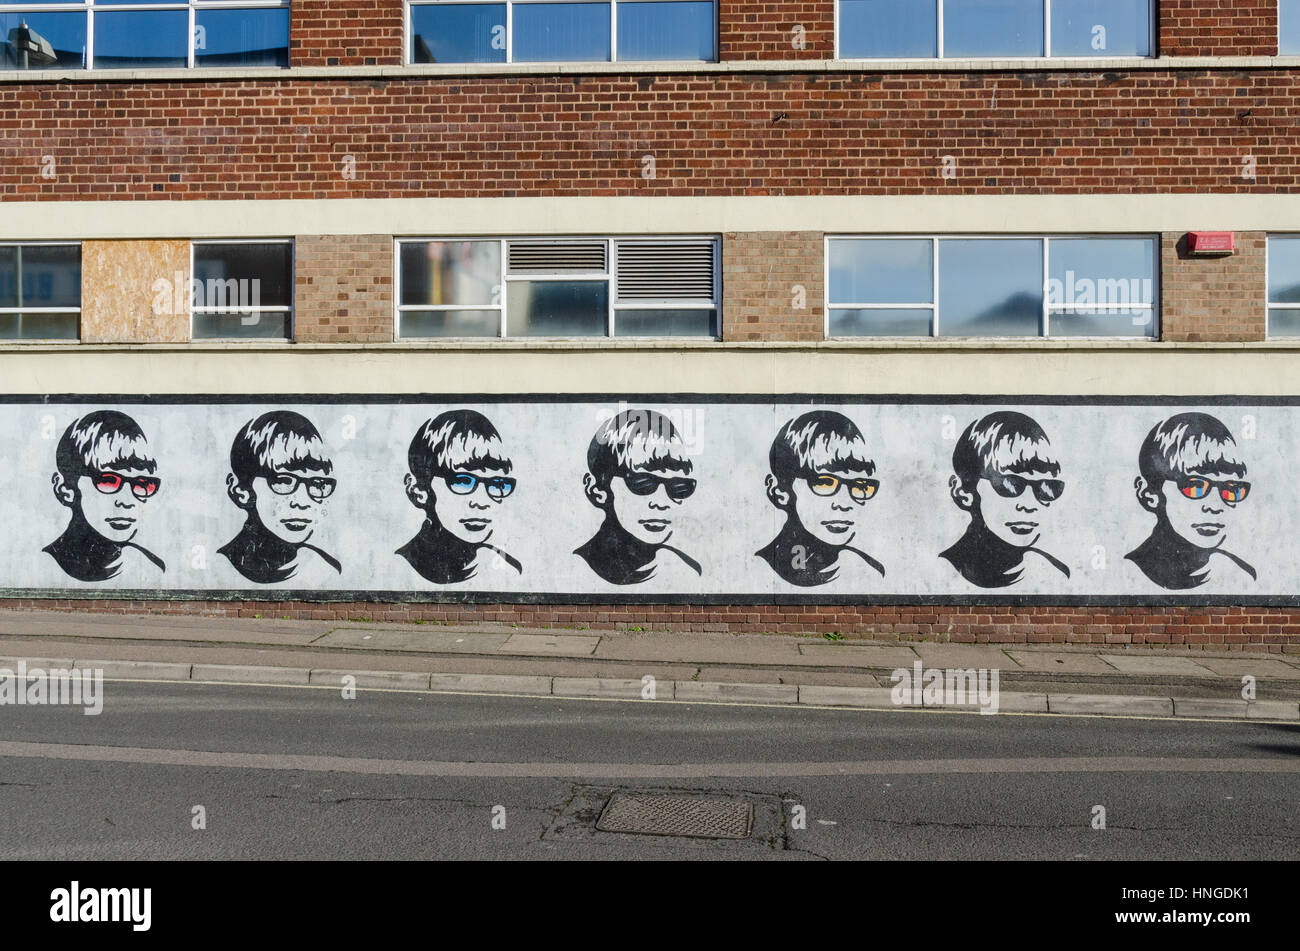 Boy with Glasses mural in Lower Essex Street, Birmingham painted by the street artist Golden Boy Stock Photo